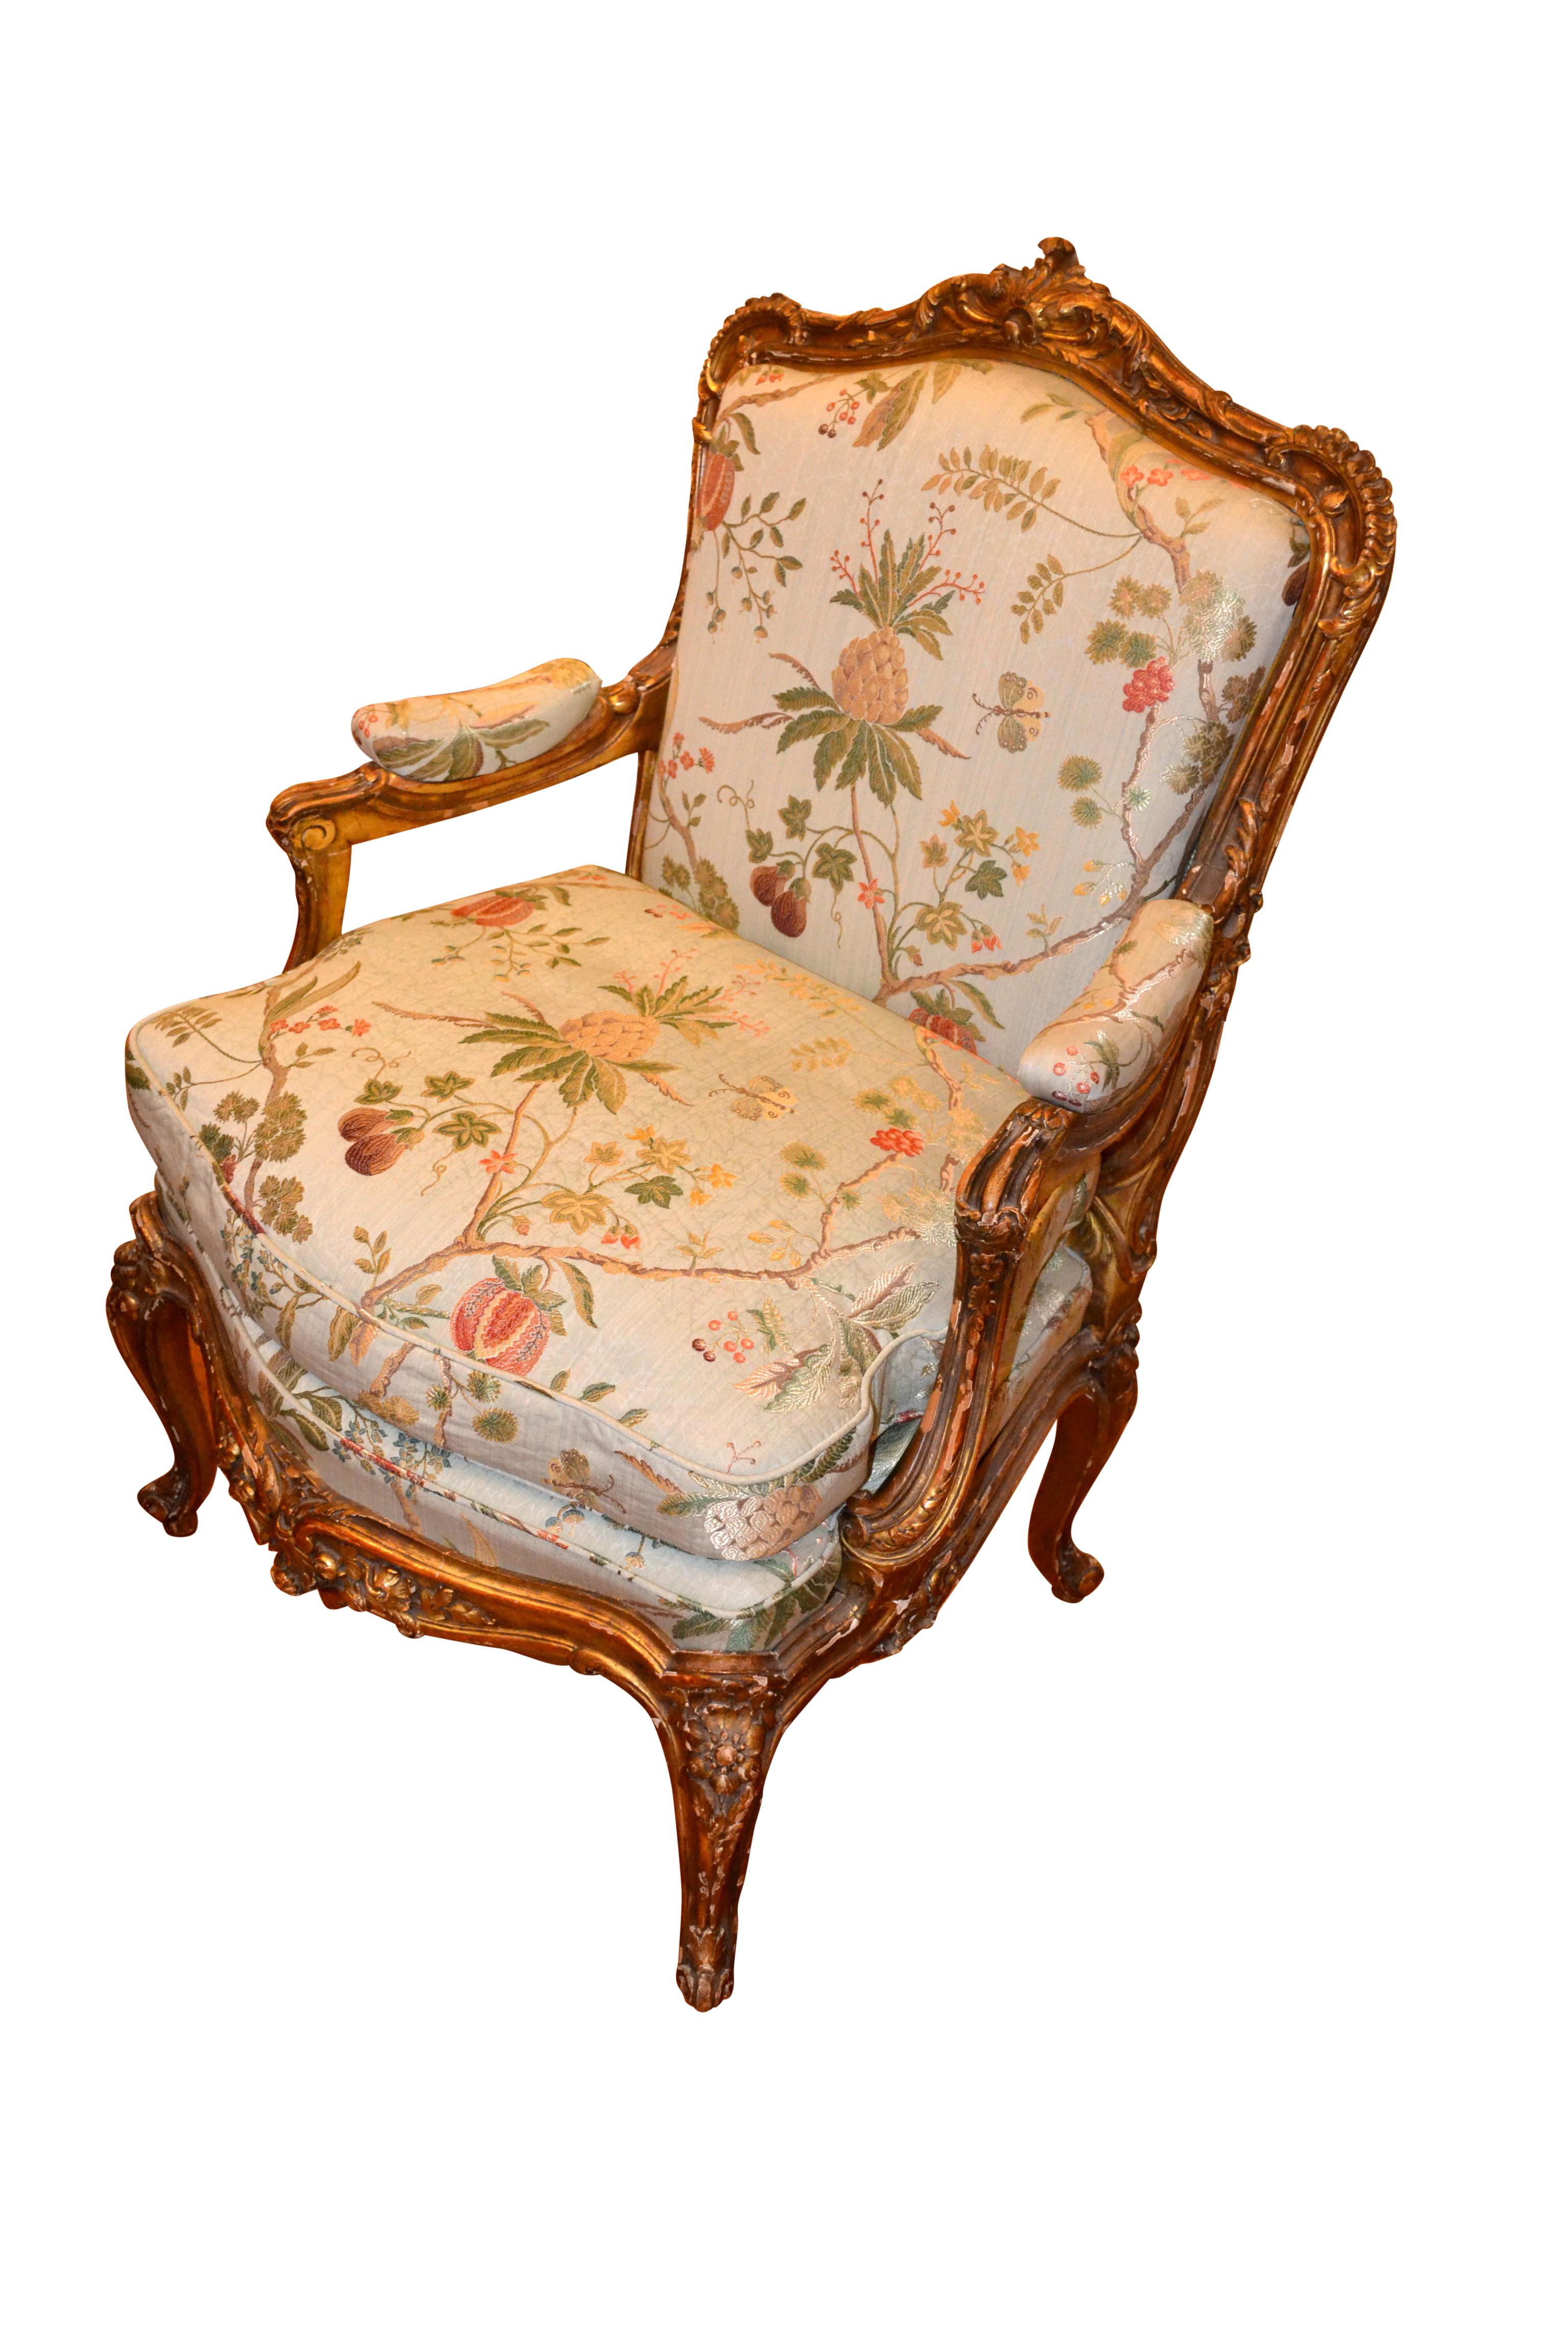 A superbly carved single Louis XV style open arm chair with overall deep crisp carving to the gilded beechwood frame, upholstered in light blue green Scalamandre silk floral fabric. Likely mid-19th century, French.